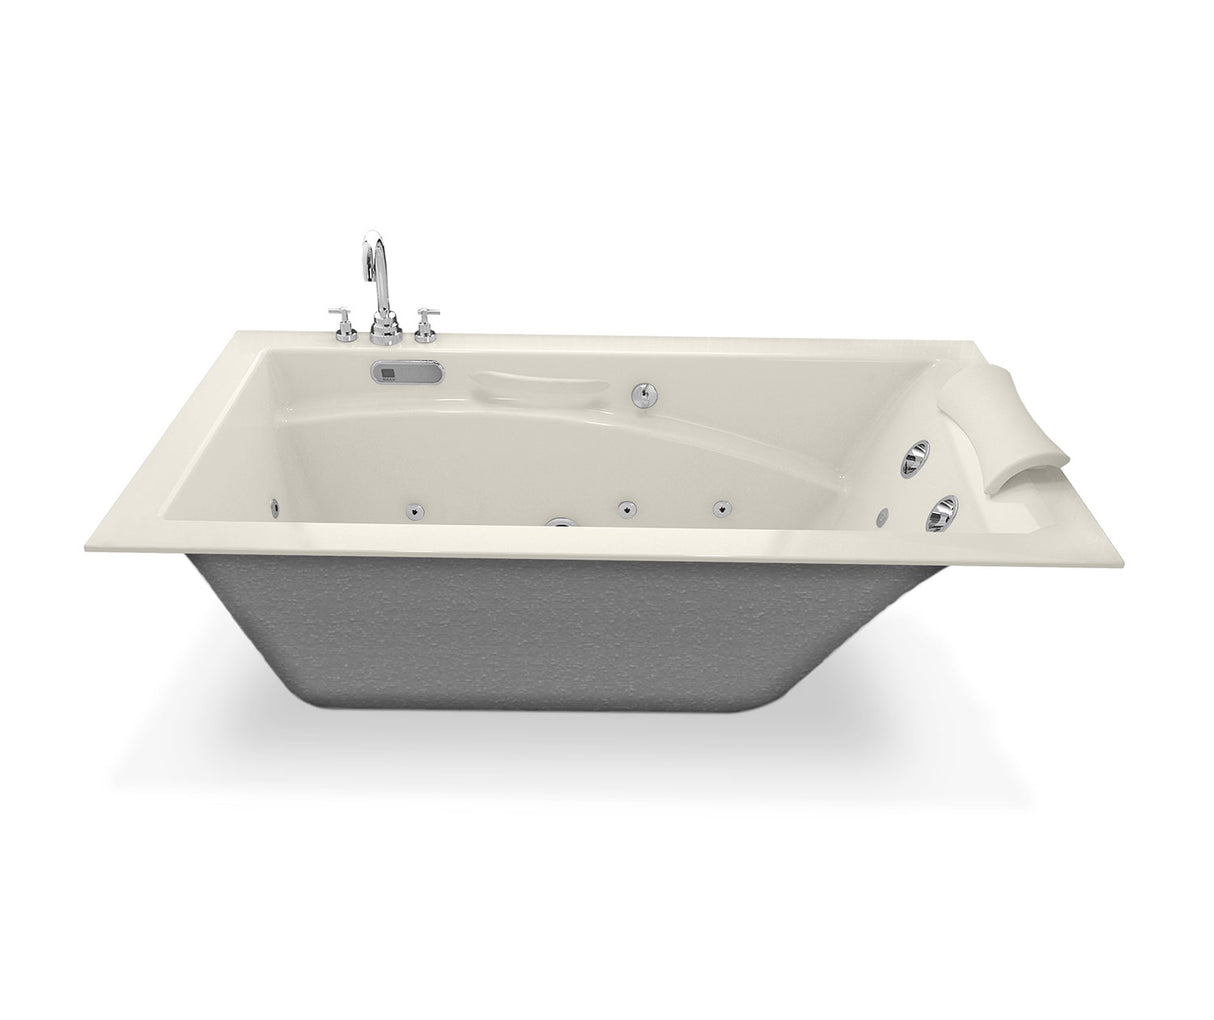 MAAX 101265-R-000-007 Optik 6032 Acrylic Alcove Right-Hand Drain Bathtub in Biscuit